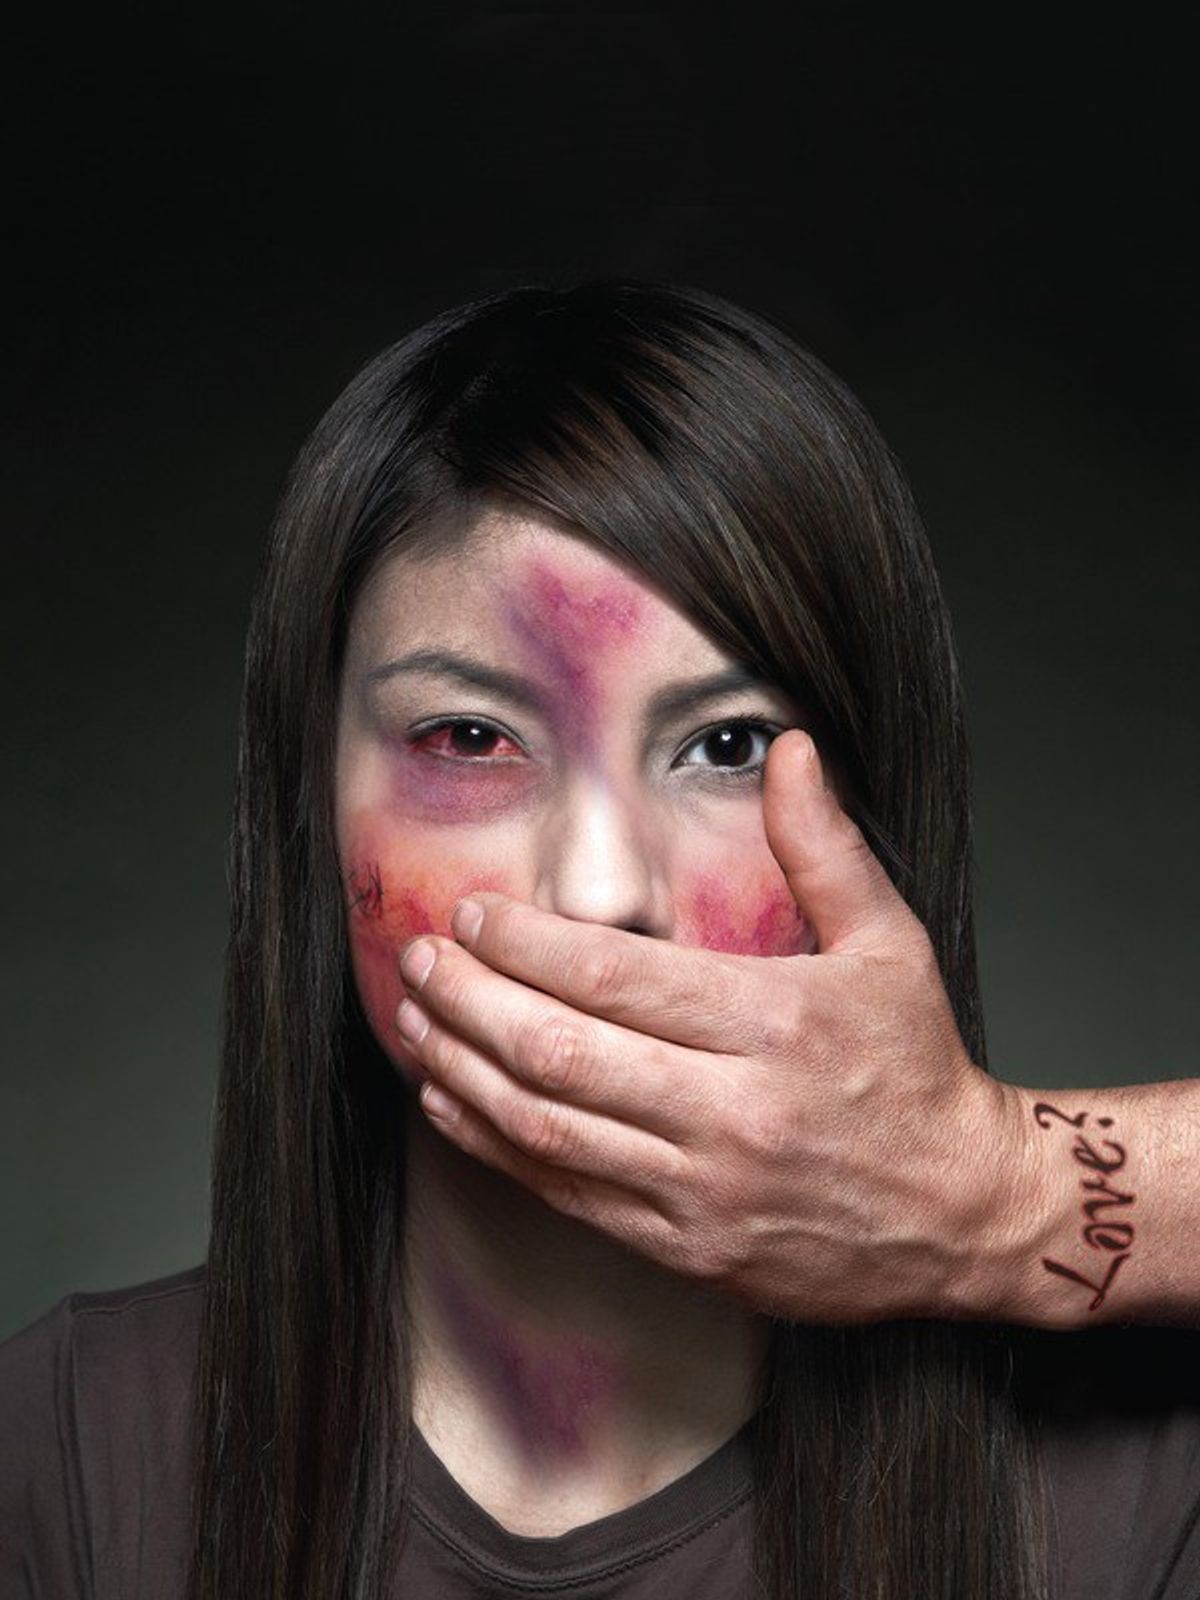 What To Do About Domestic Violence